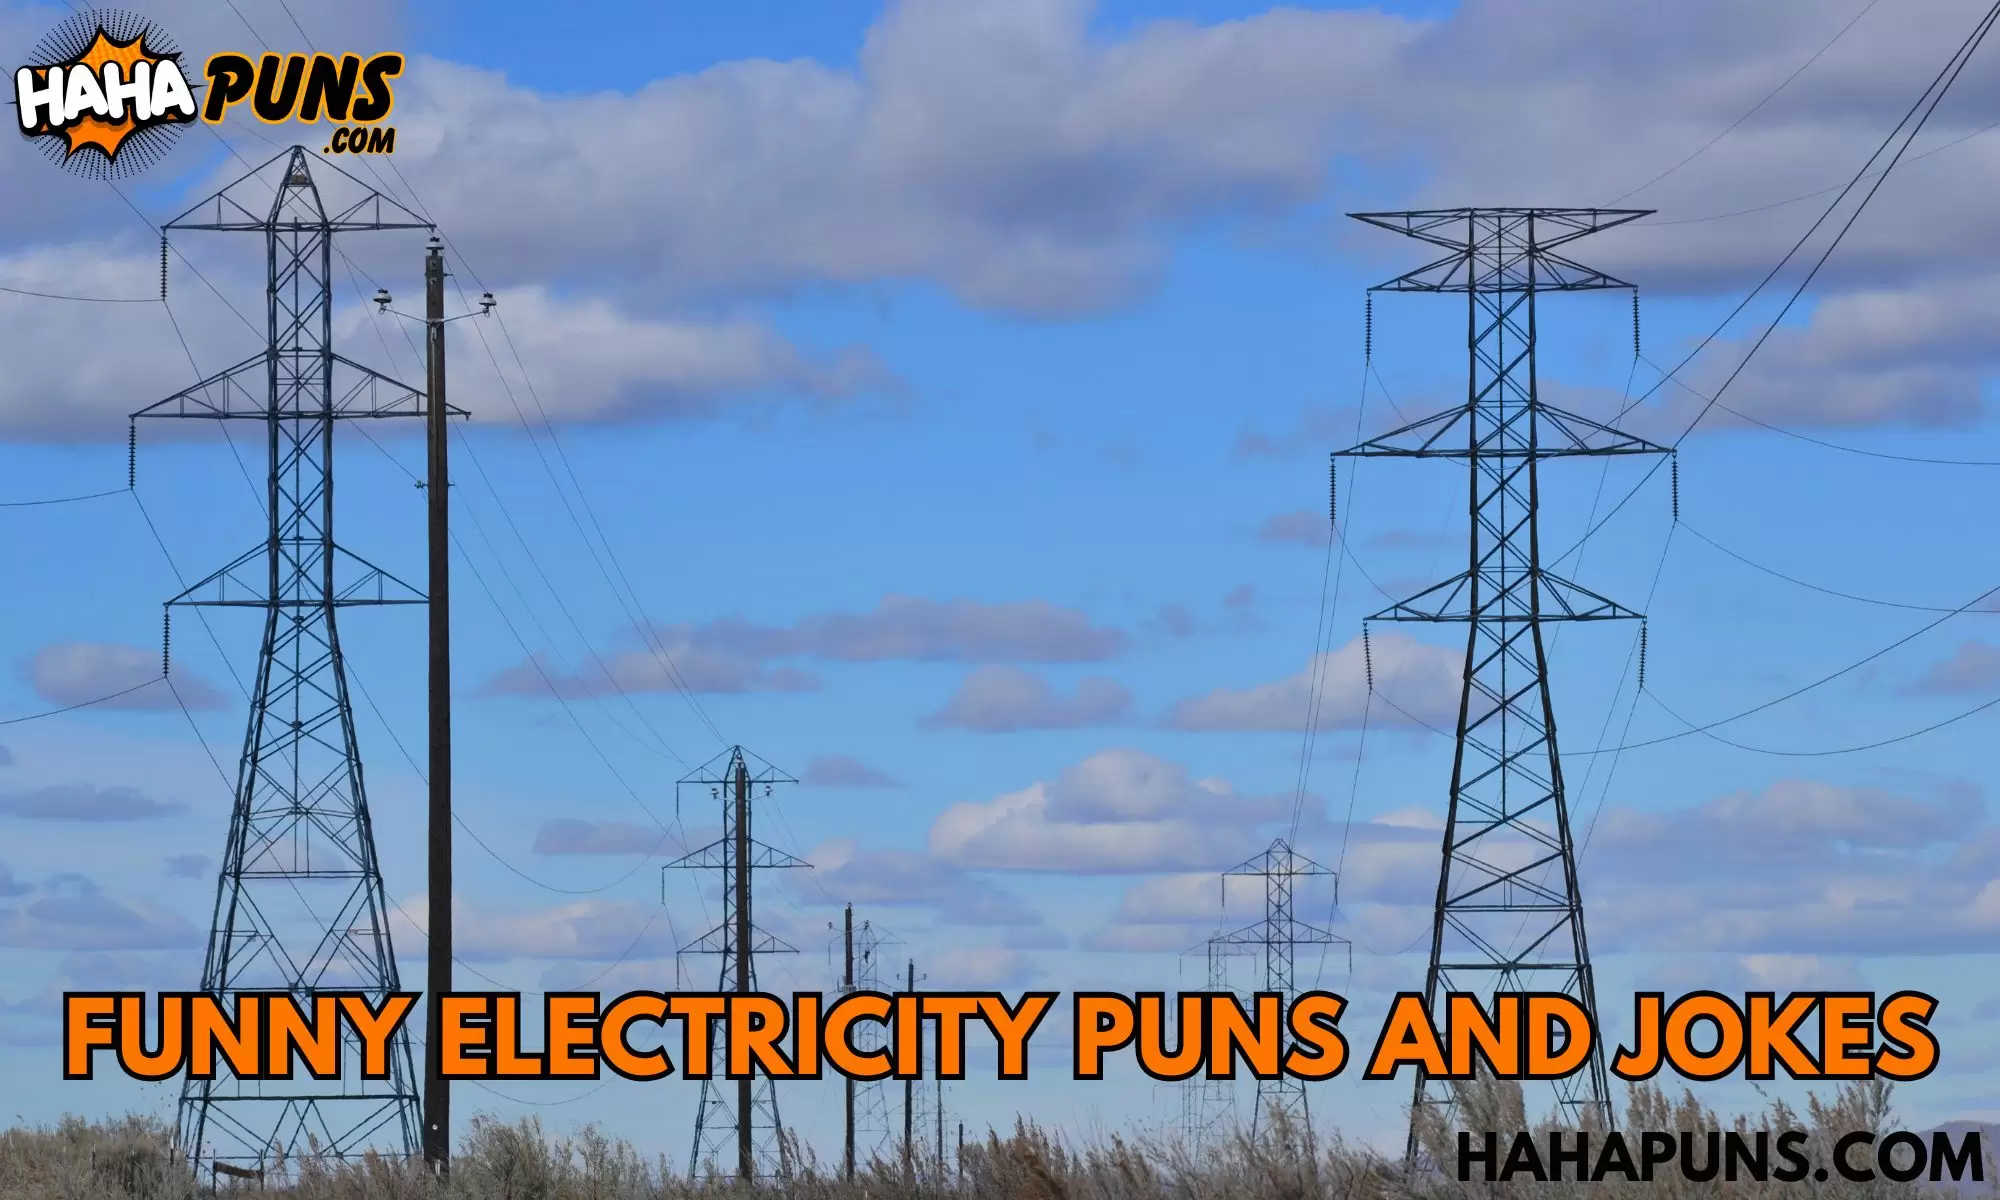 Funny Electricity Puns And Jokes